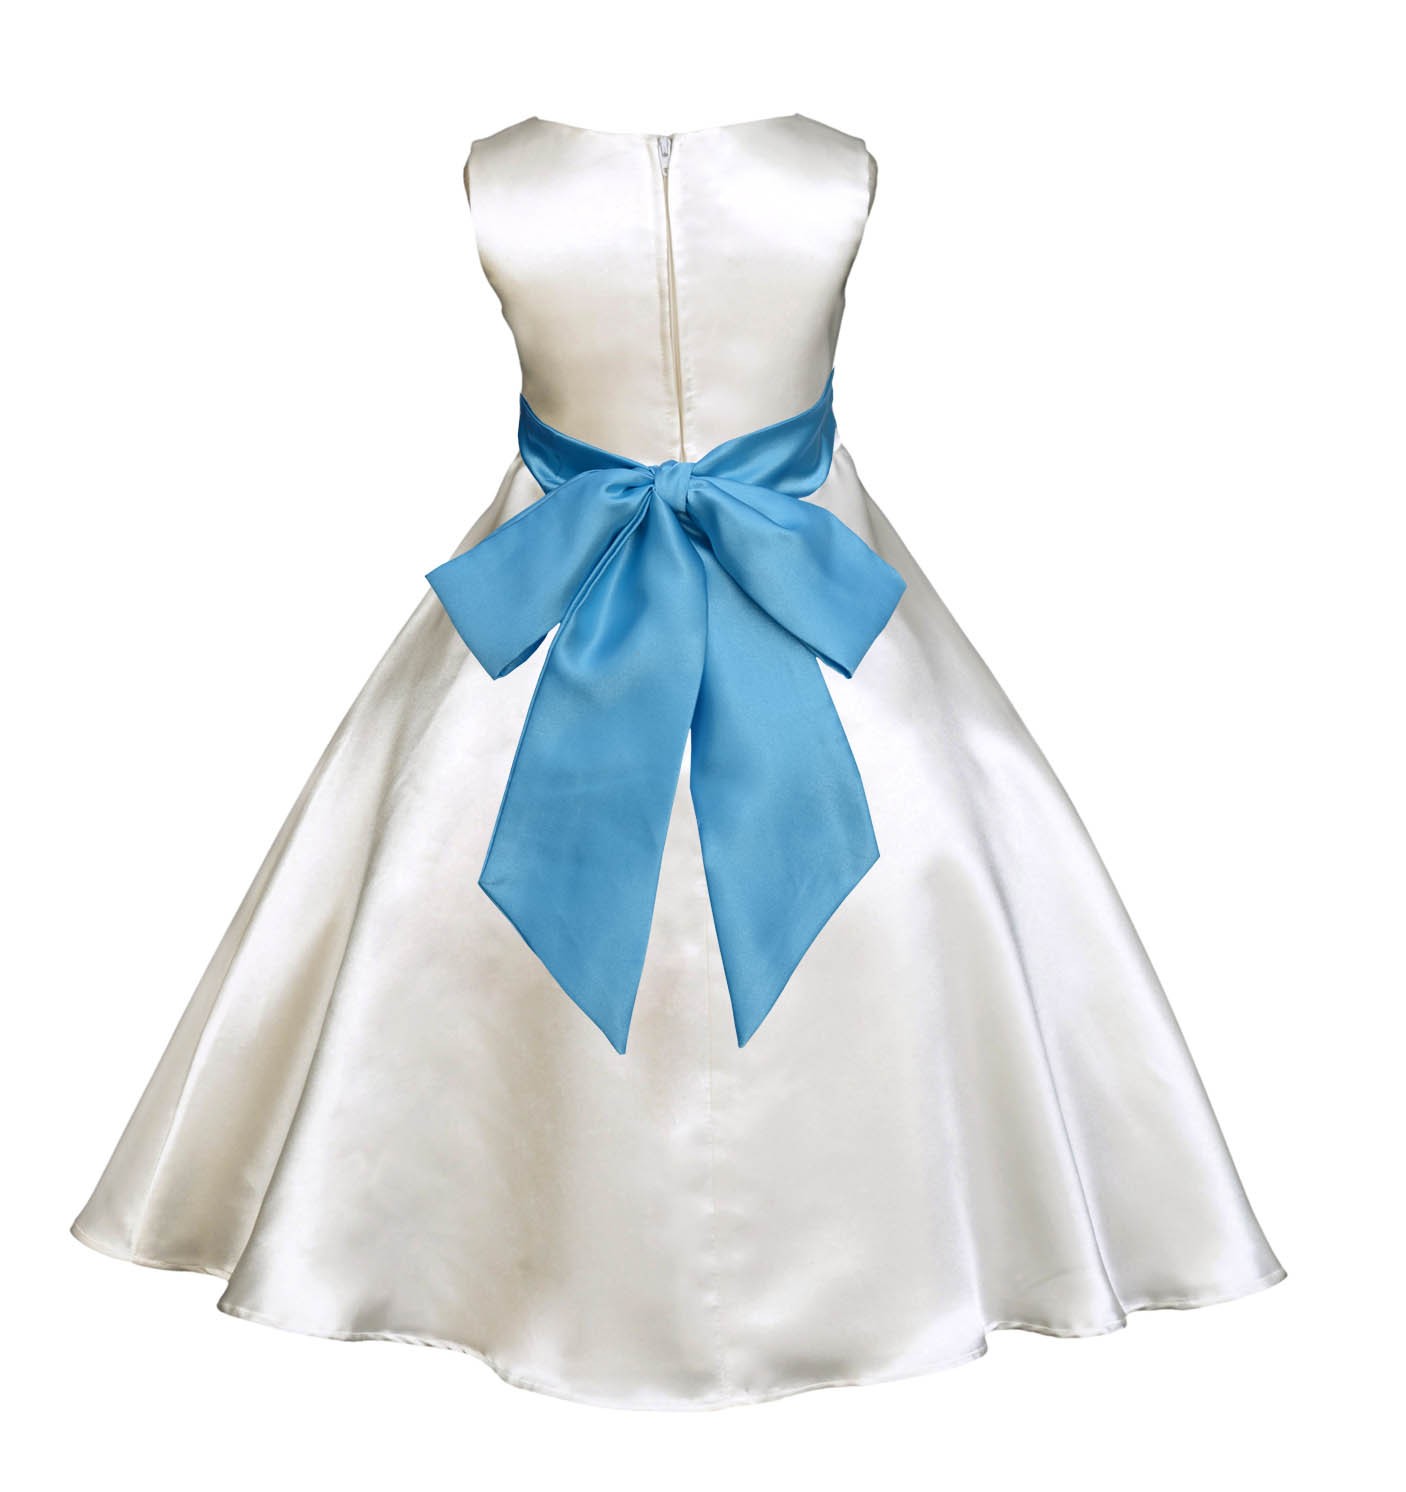 Ivory/Turquoise A-Line Satin Flower Girl Dress Pageant Reception 821S